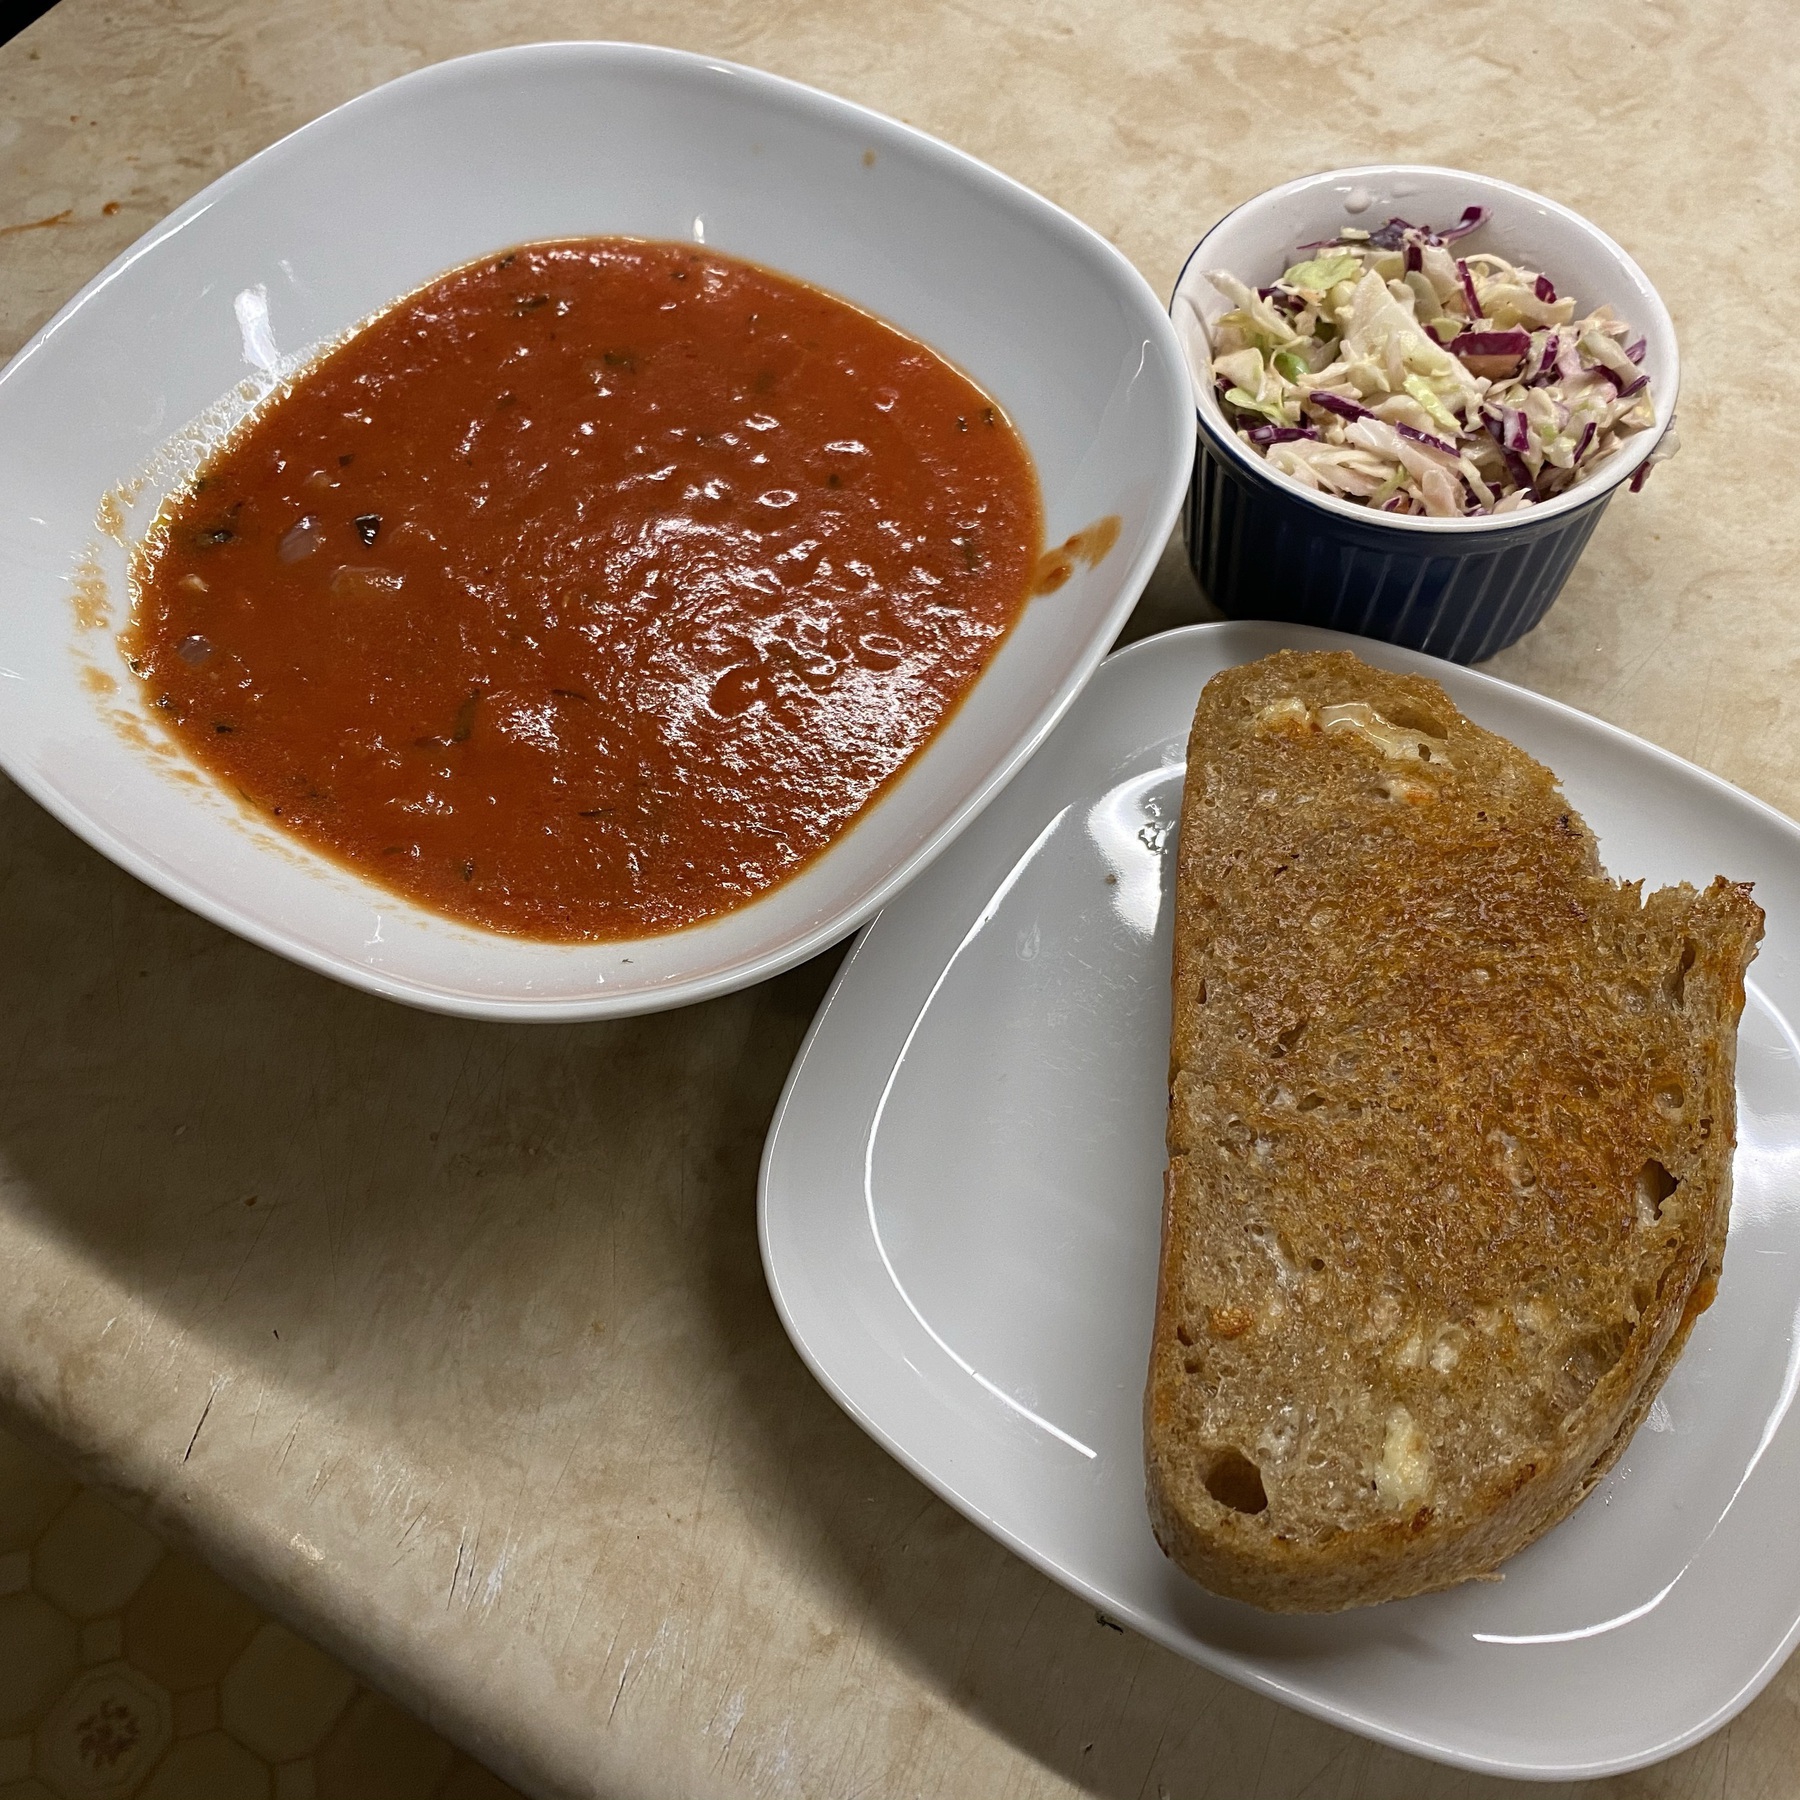 Bowl of tomato soup, grilled cheese sandwich on plate, and bowl of coleslaw.